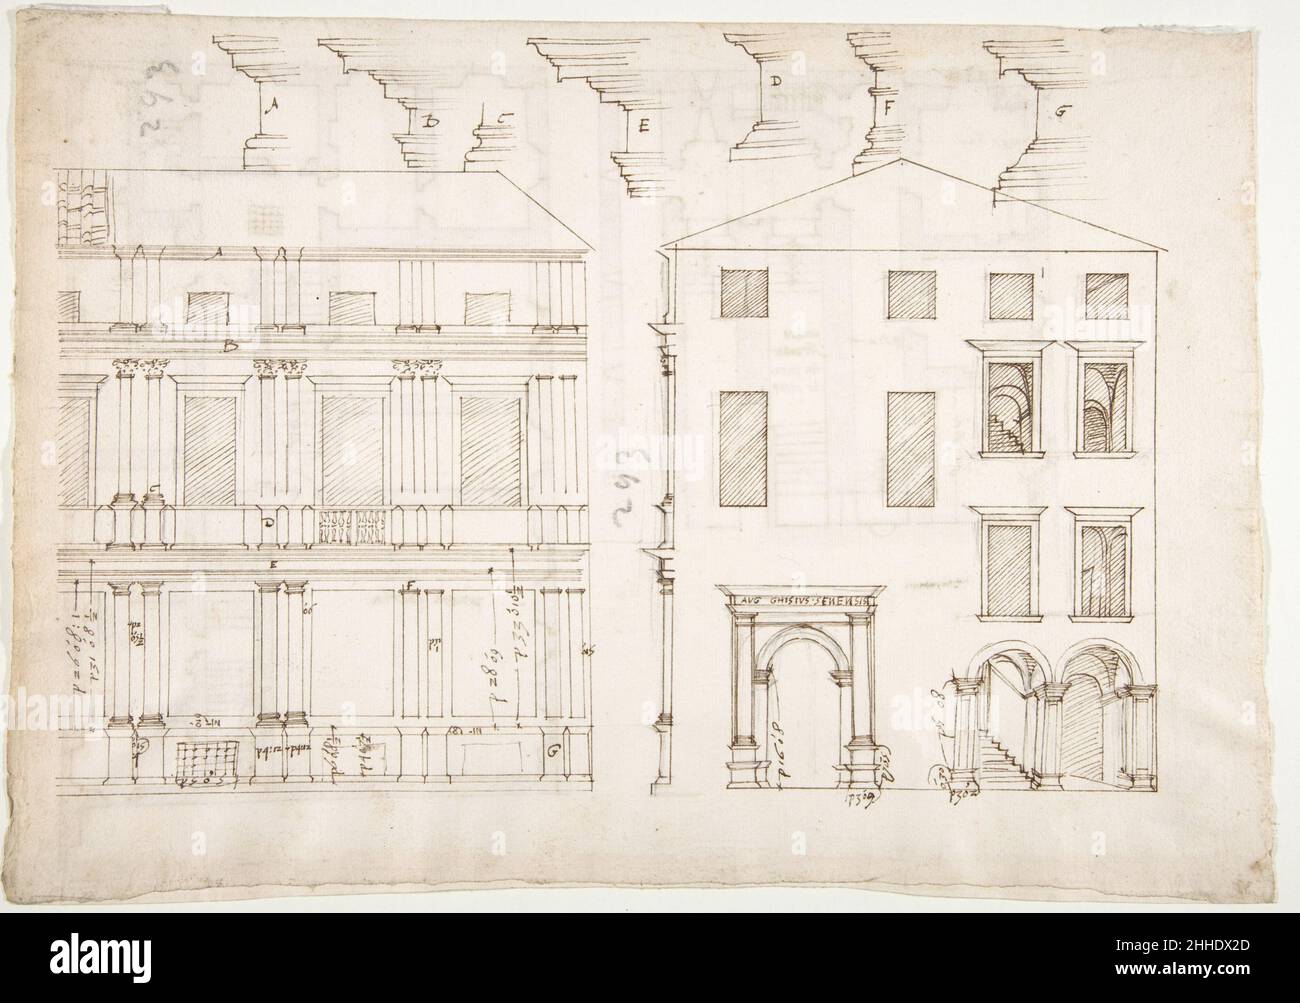 Villa Farnesina, Stables, half front elevation and end elevation (recto) Palazzo Salviati-Adimari, plan (verso) early to mid-16th century Drawn by Anonymous, French, 16th century French. Villa Farnesina, Stables, half front elevation and end elevation (recto) Palazzo Salviati-Adimari, plan (verso). early to mid-16th century. Dark brown ink, black chalk, ink wash, and incised lines. Drawings Stock Photo